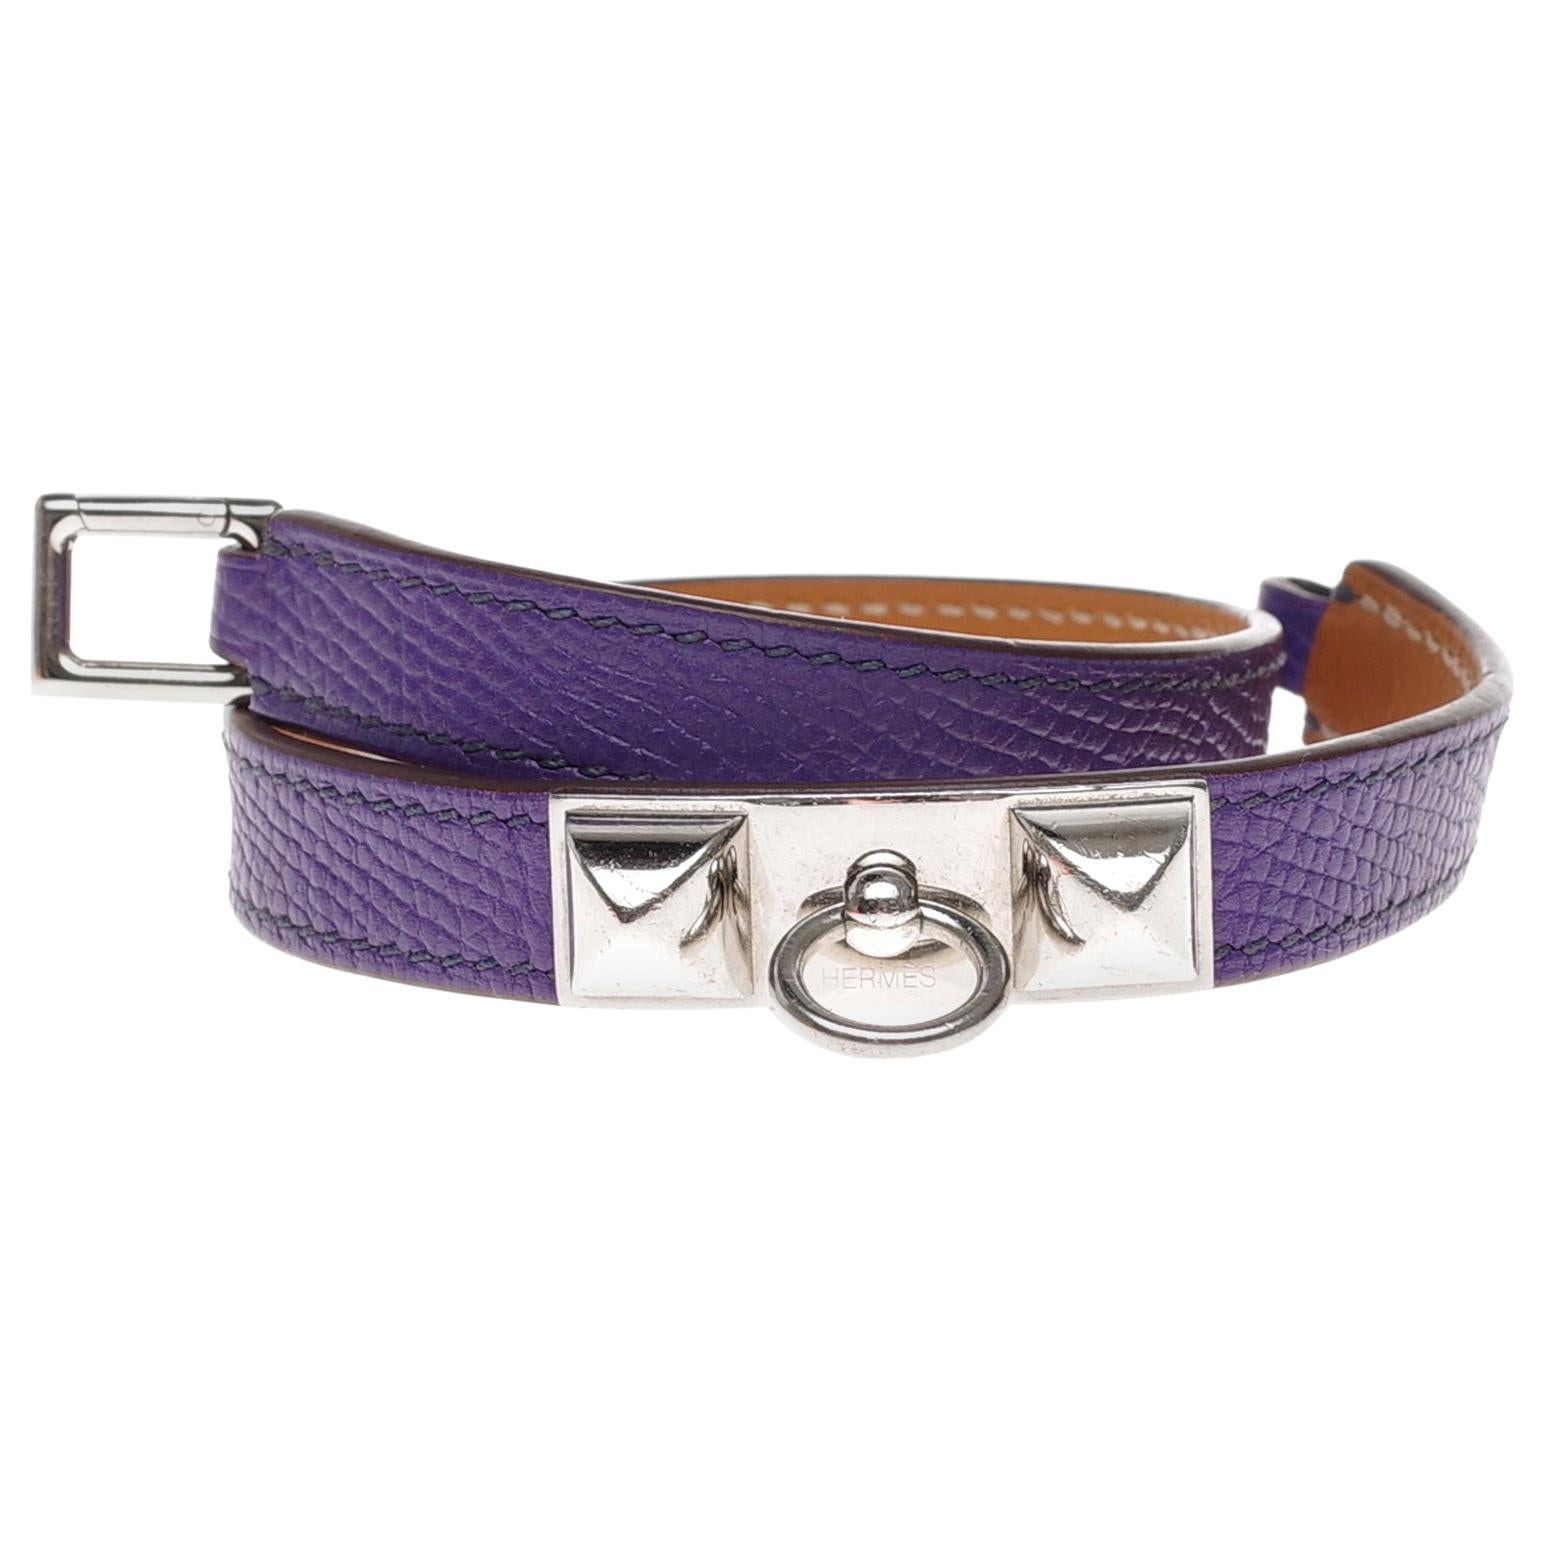 Stunning Hermès Kelly double tour bracelet in purple epsom and silvery hardware